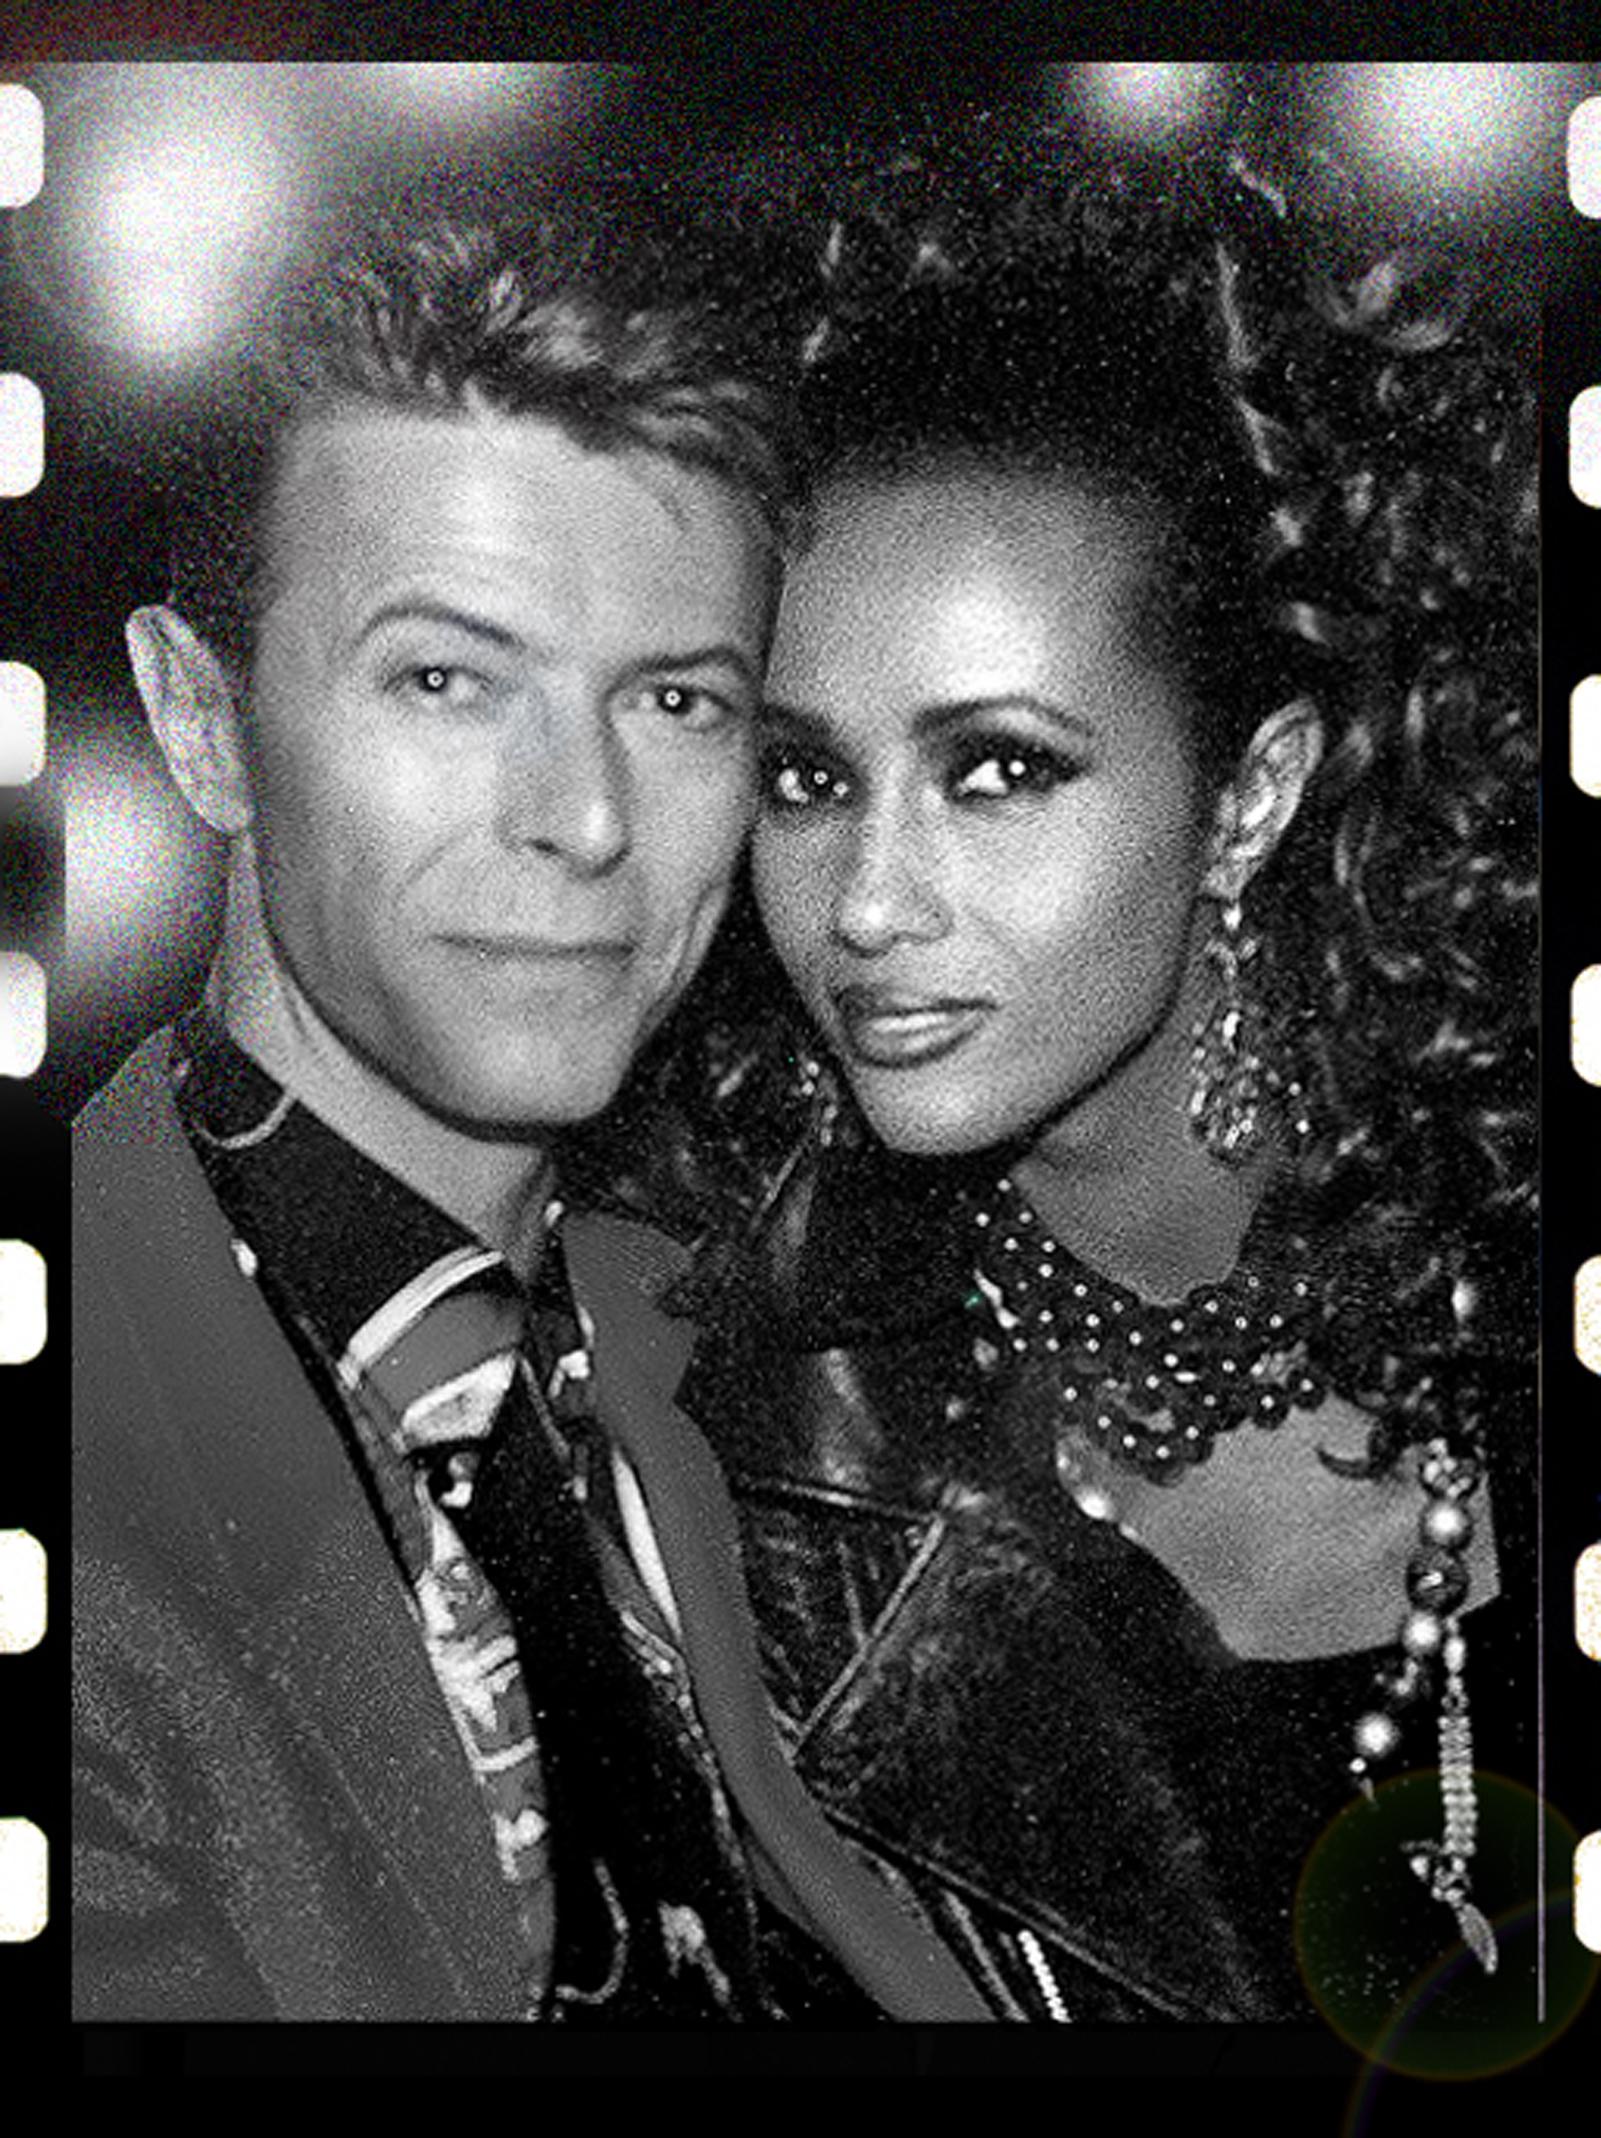 Gary Bernstein Portrait Photograph - David Bowie and Iman (this is a large canvas print; see below for smaller sizes)